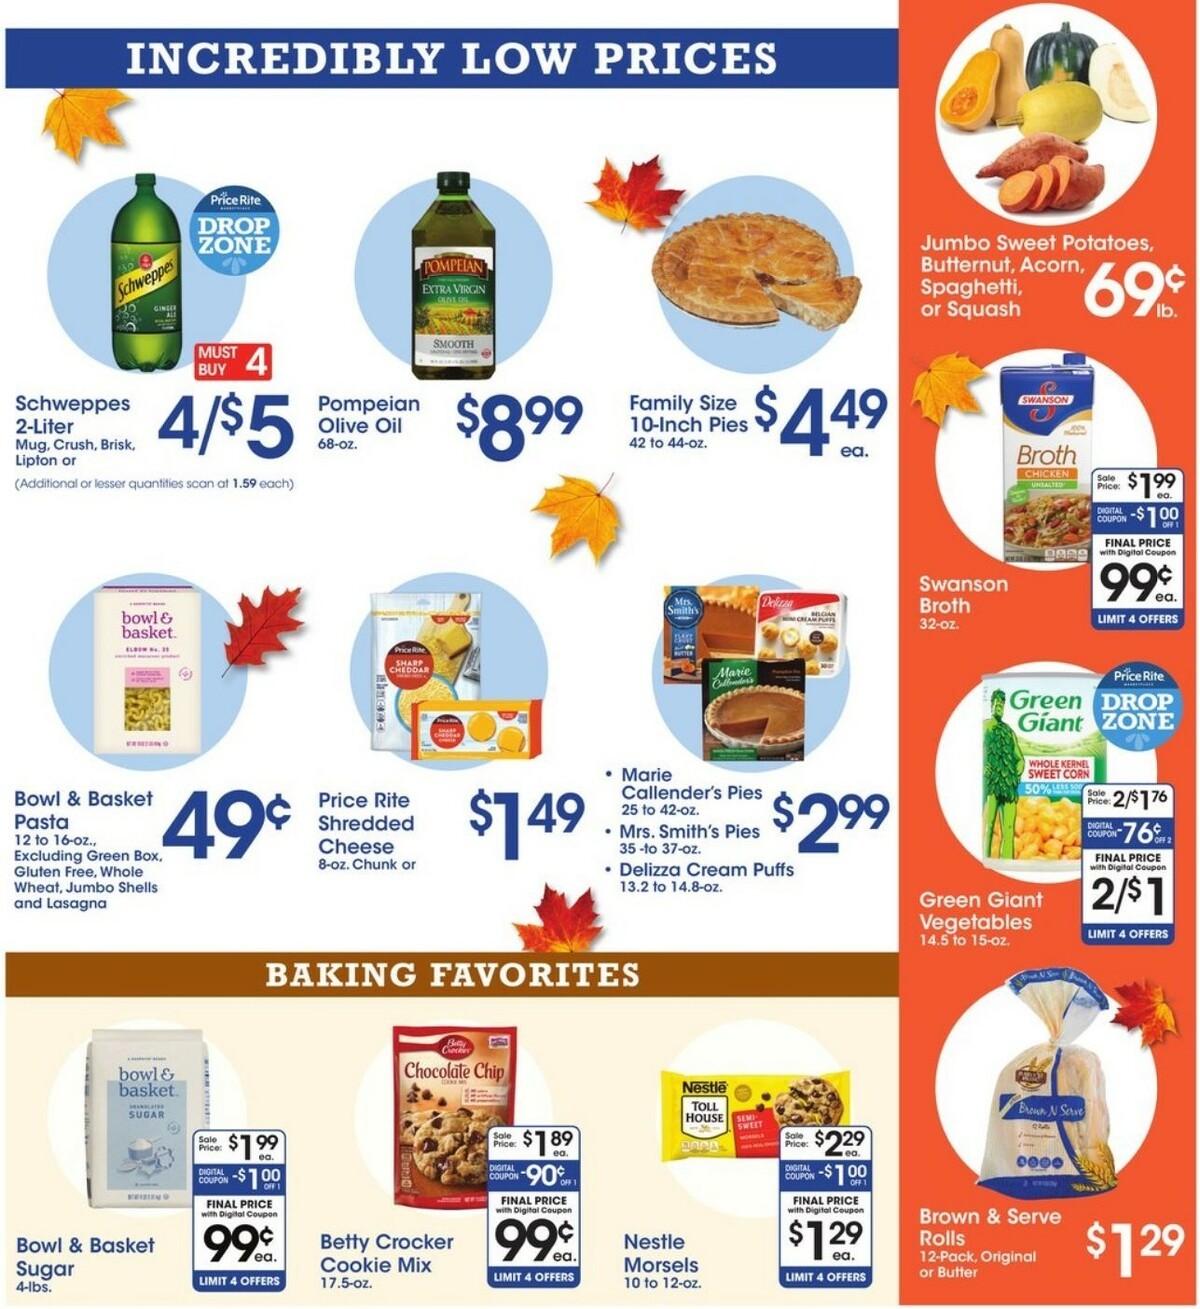 Price Rite Weekly Ad from November 19